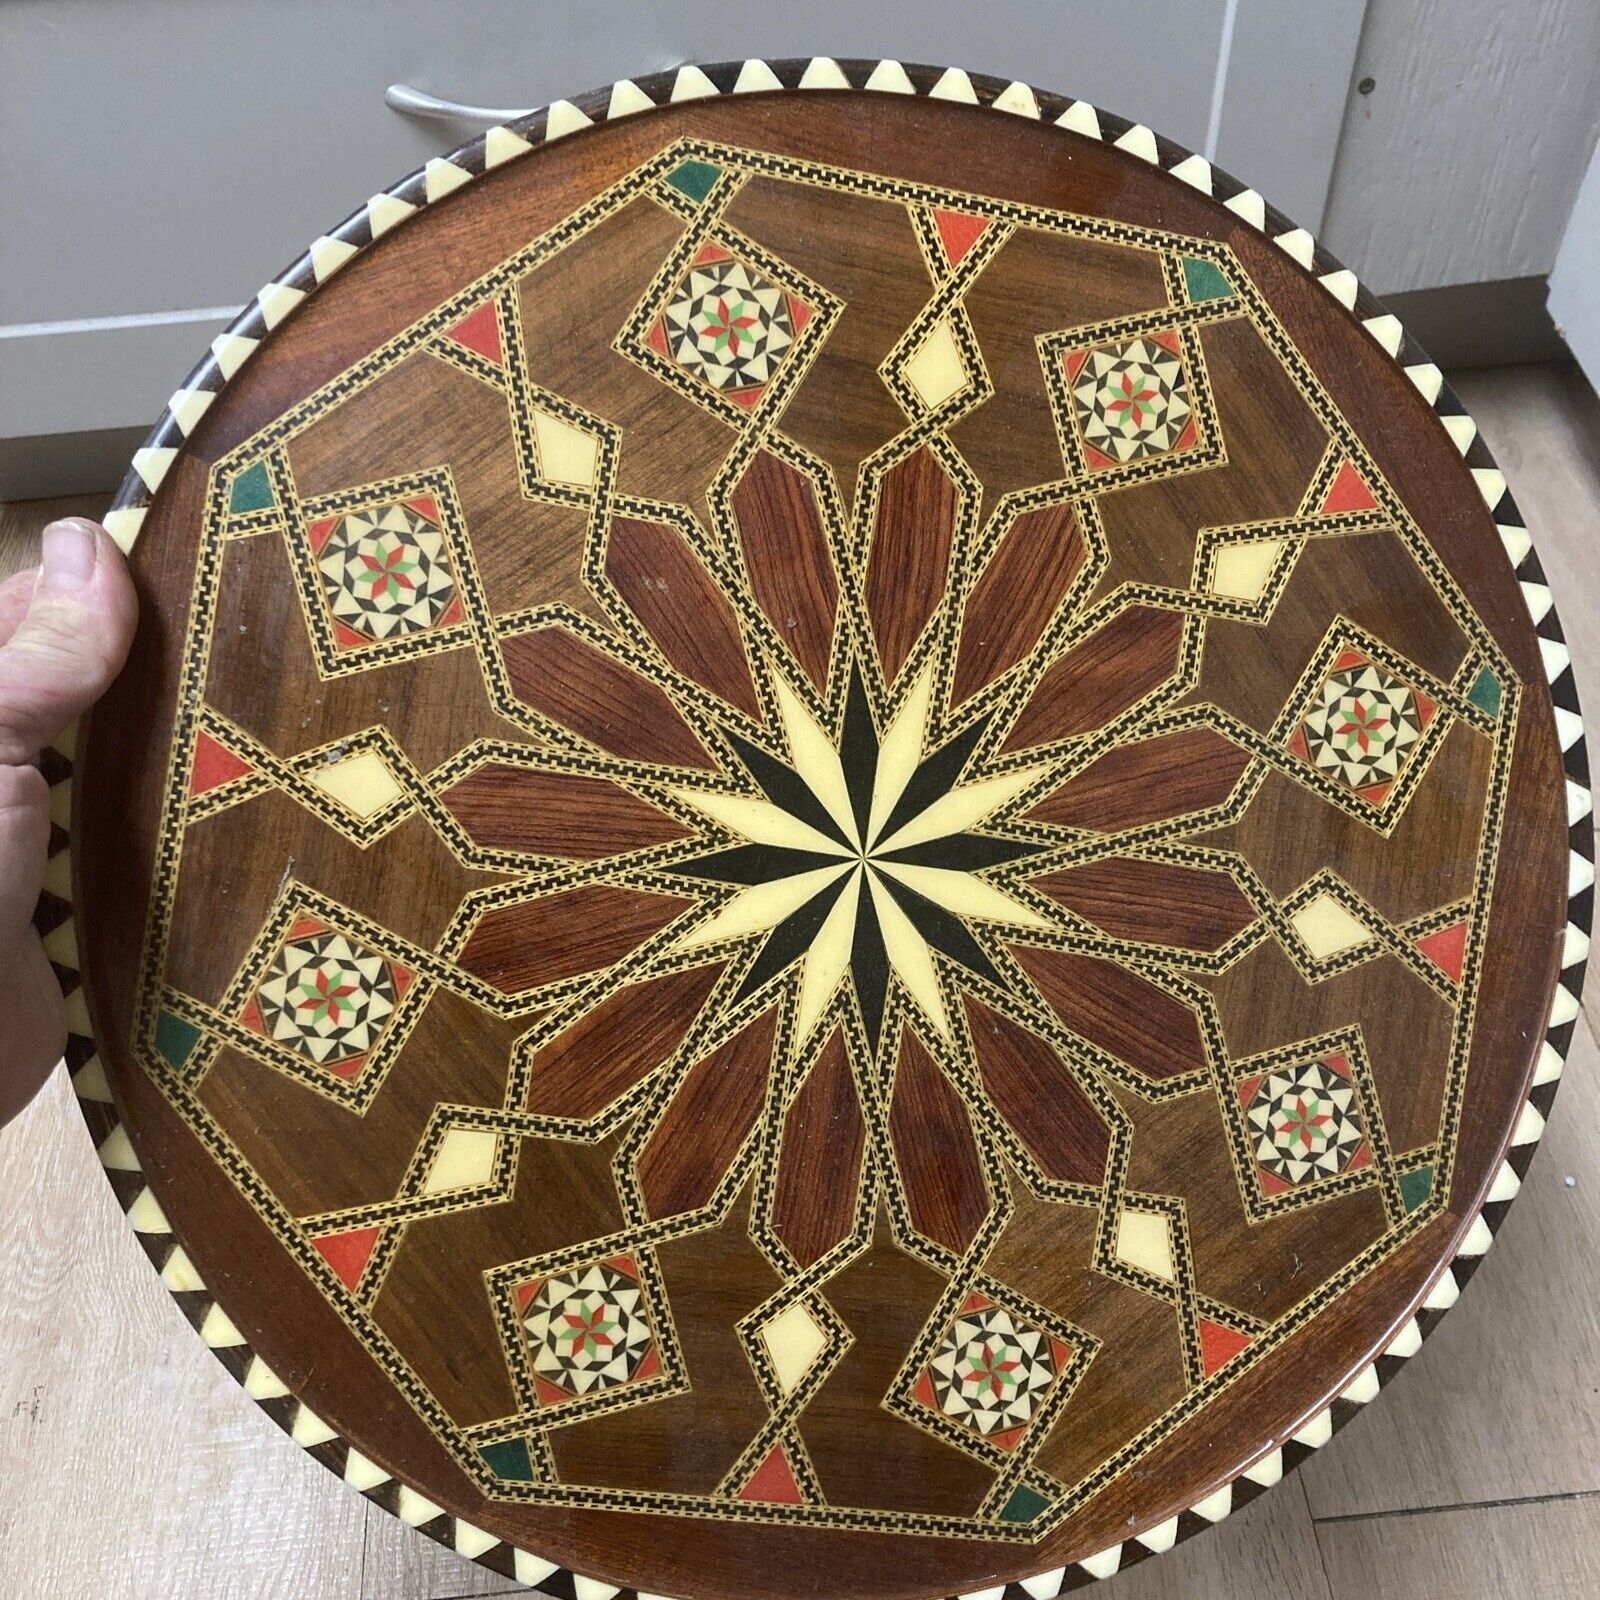 Inlaid Wood Serving Tray Very Unique And Ornette. Wow Fast Ship 🌎📦